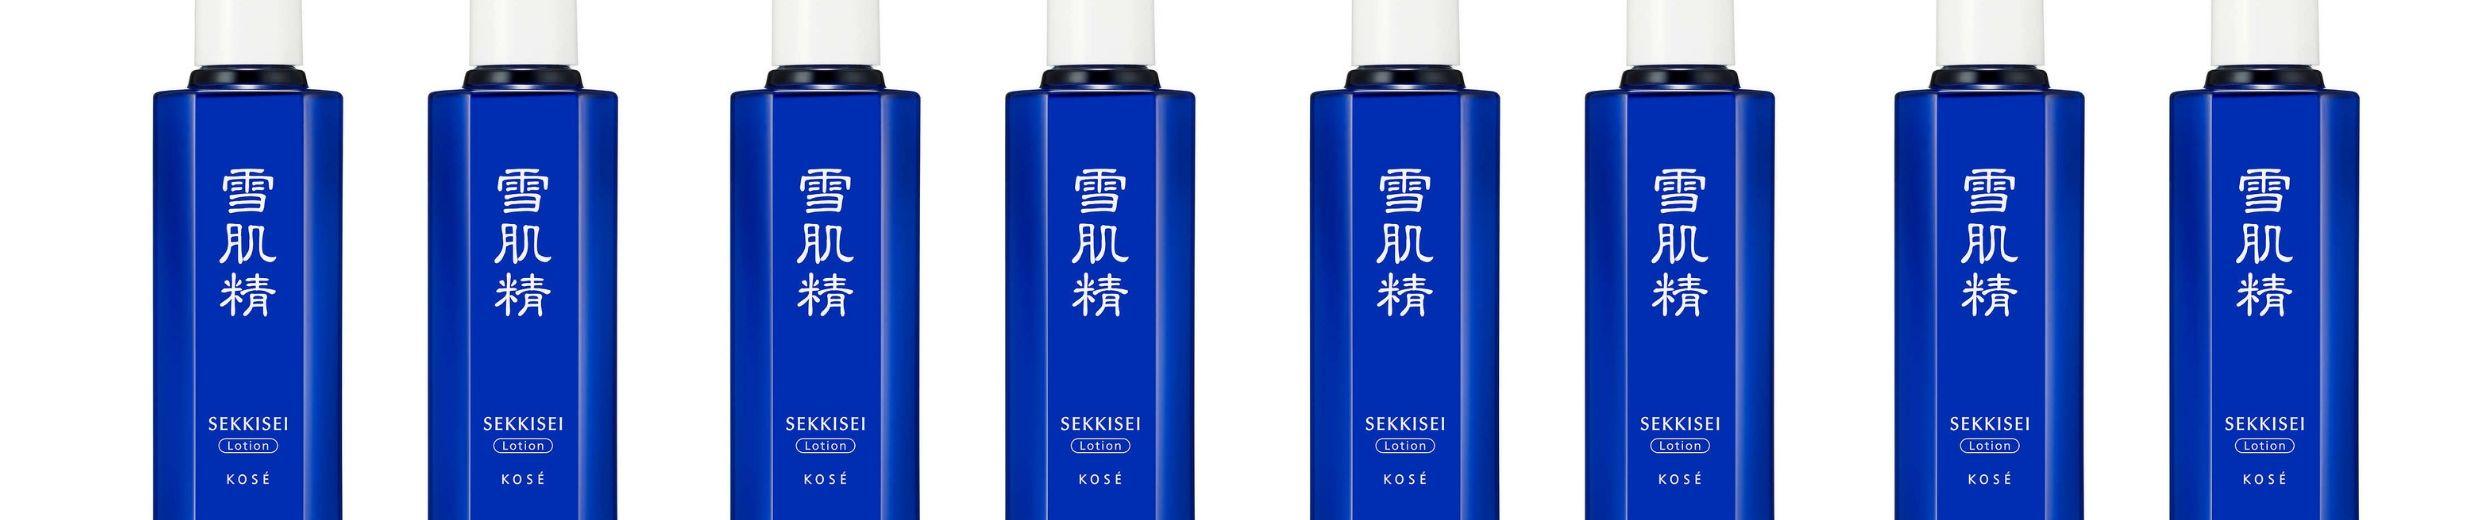 Why You Need to Know Japanese Skincare Brand Sekkisei